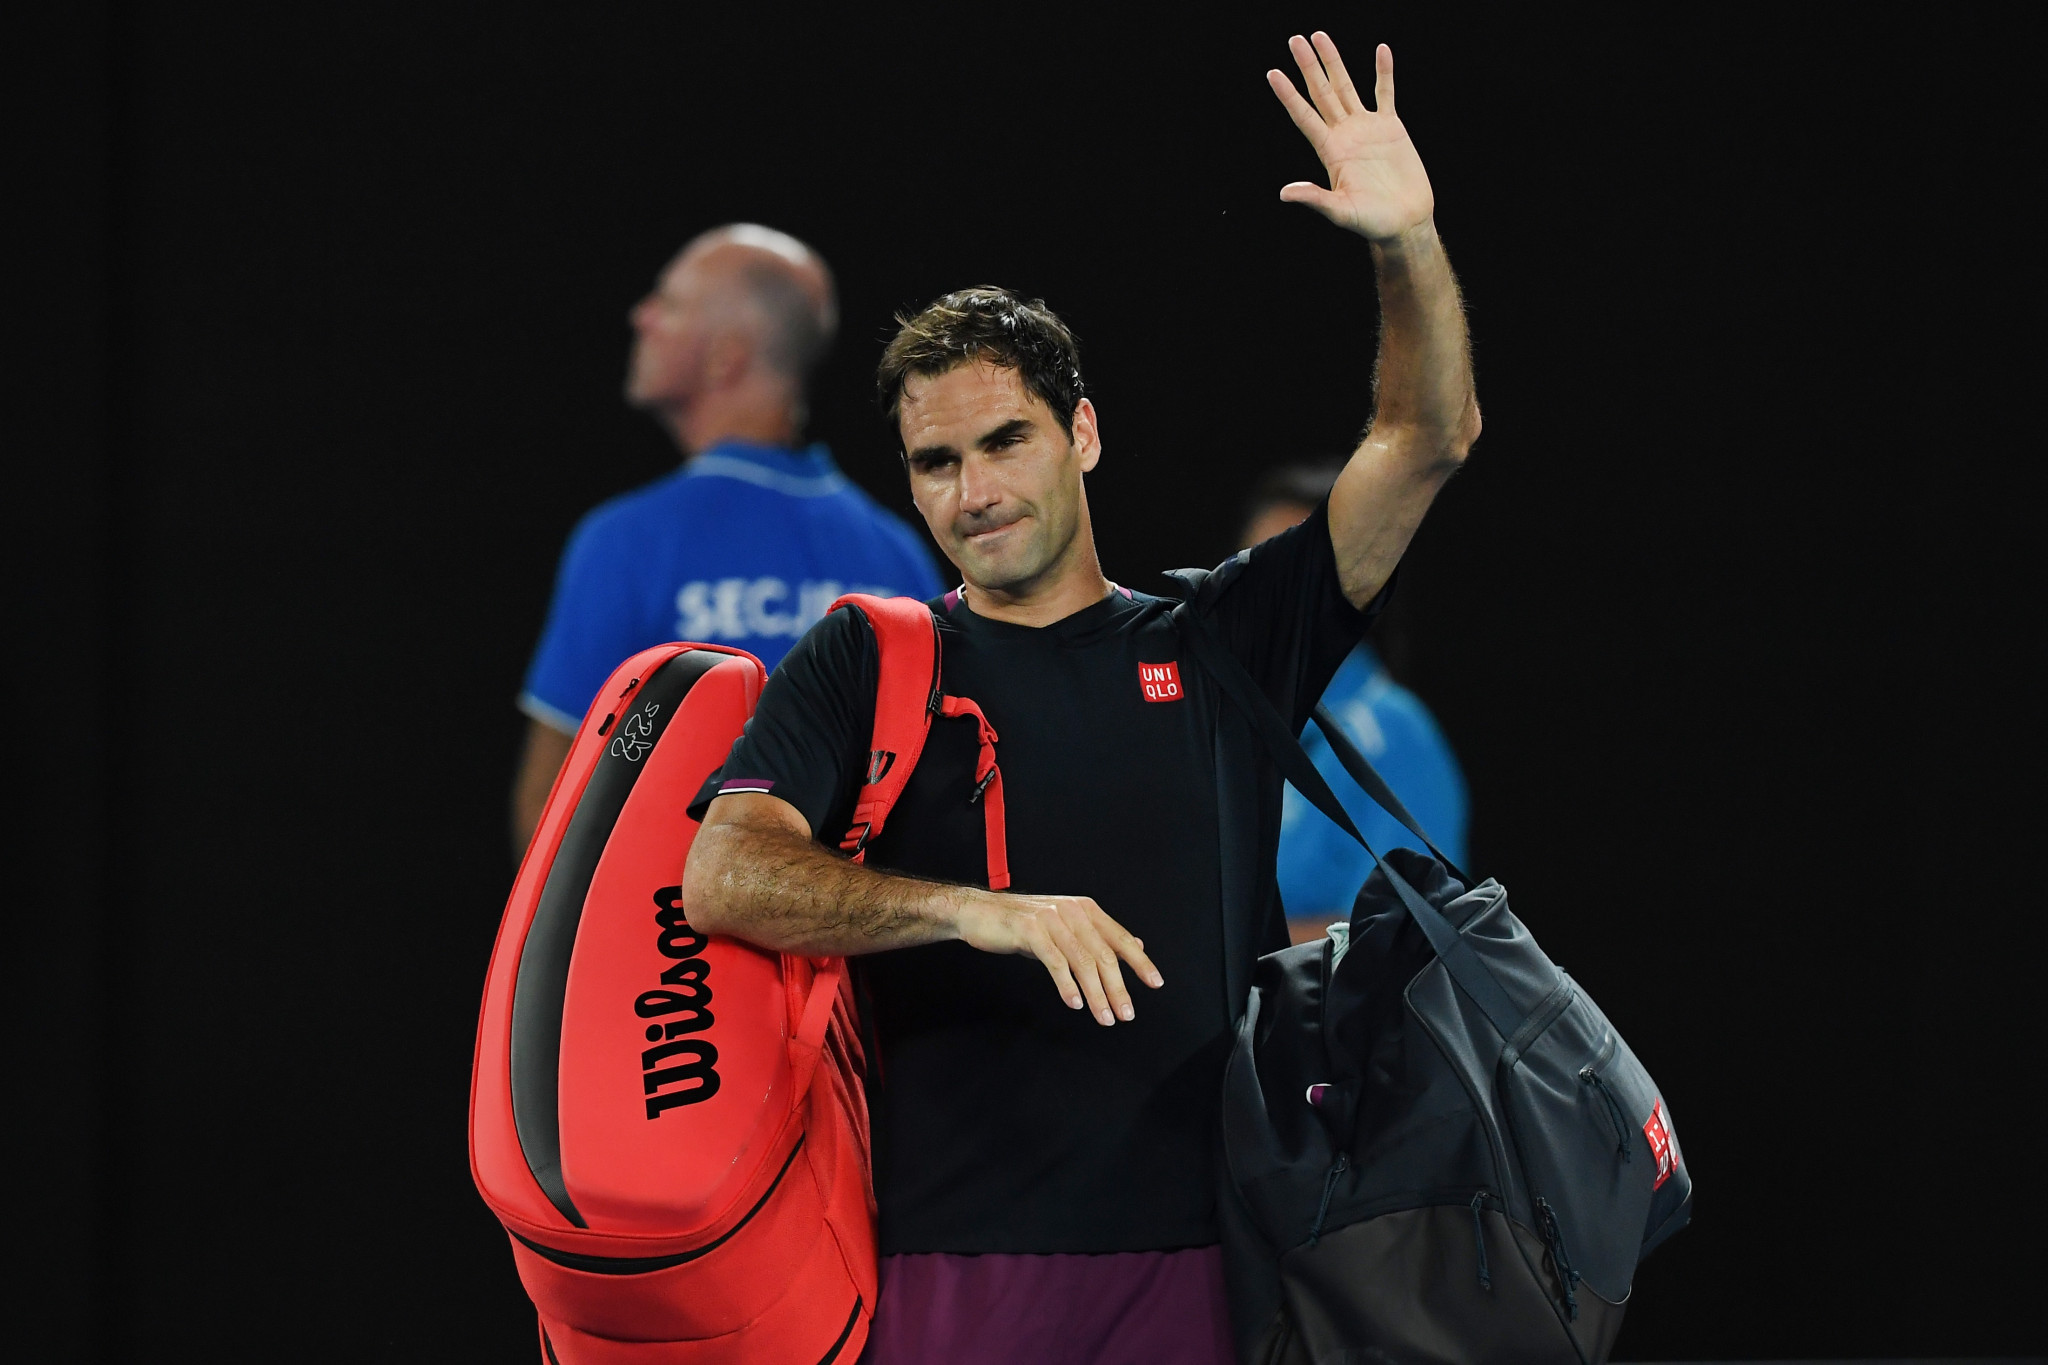 Federer waves to the crowd after his defeat  ©Getty Images